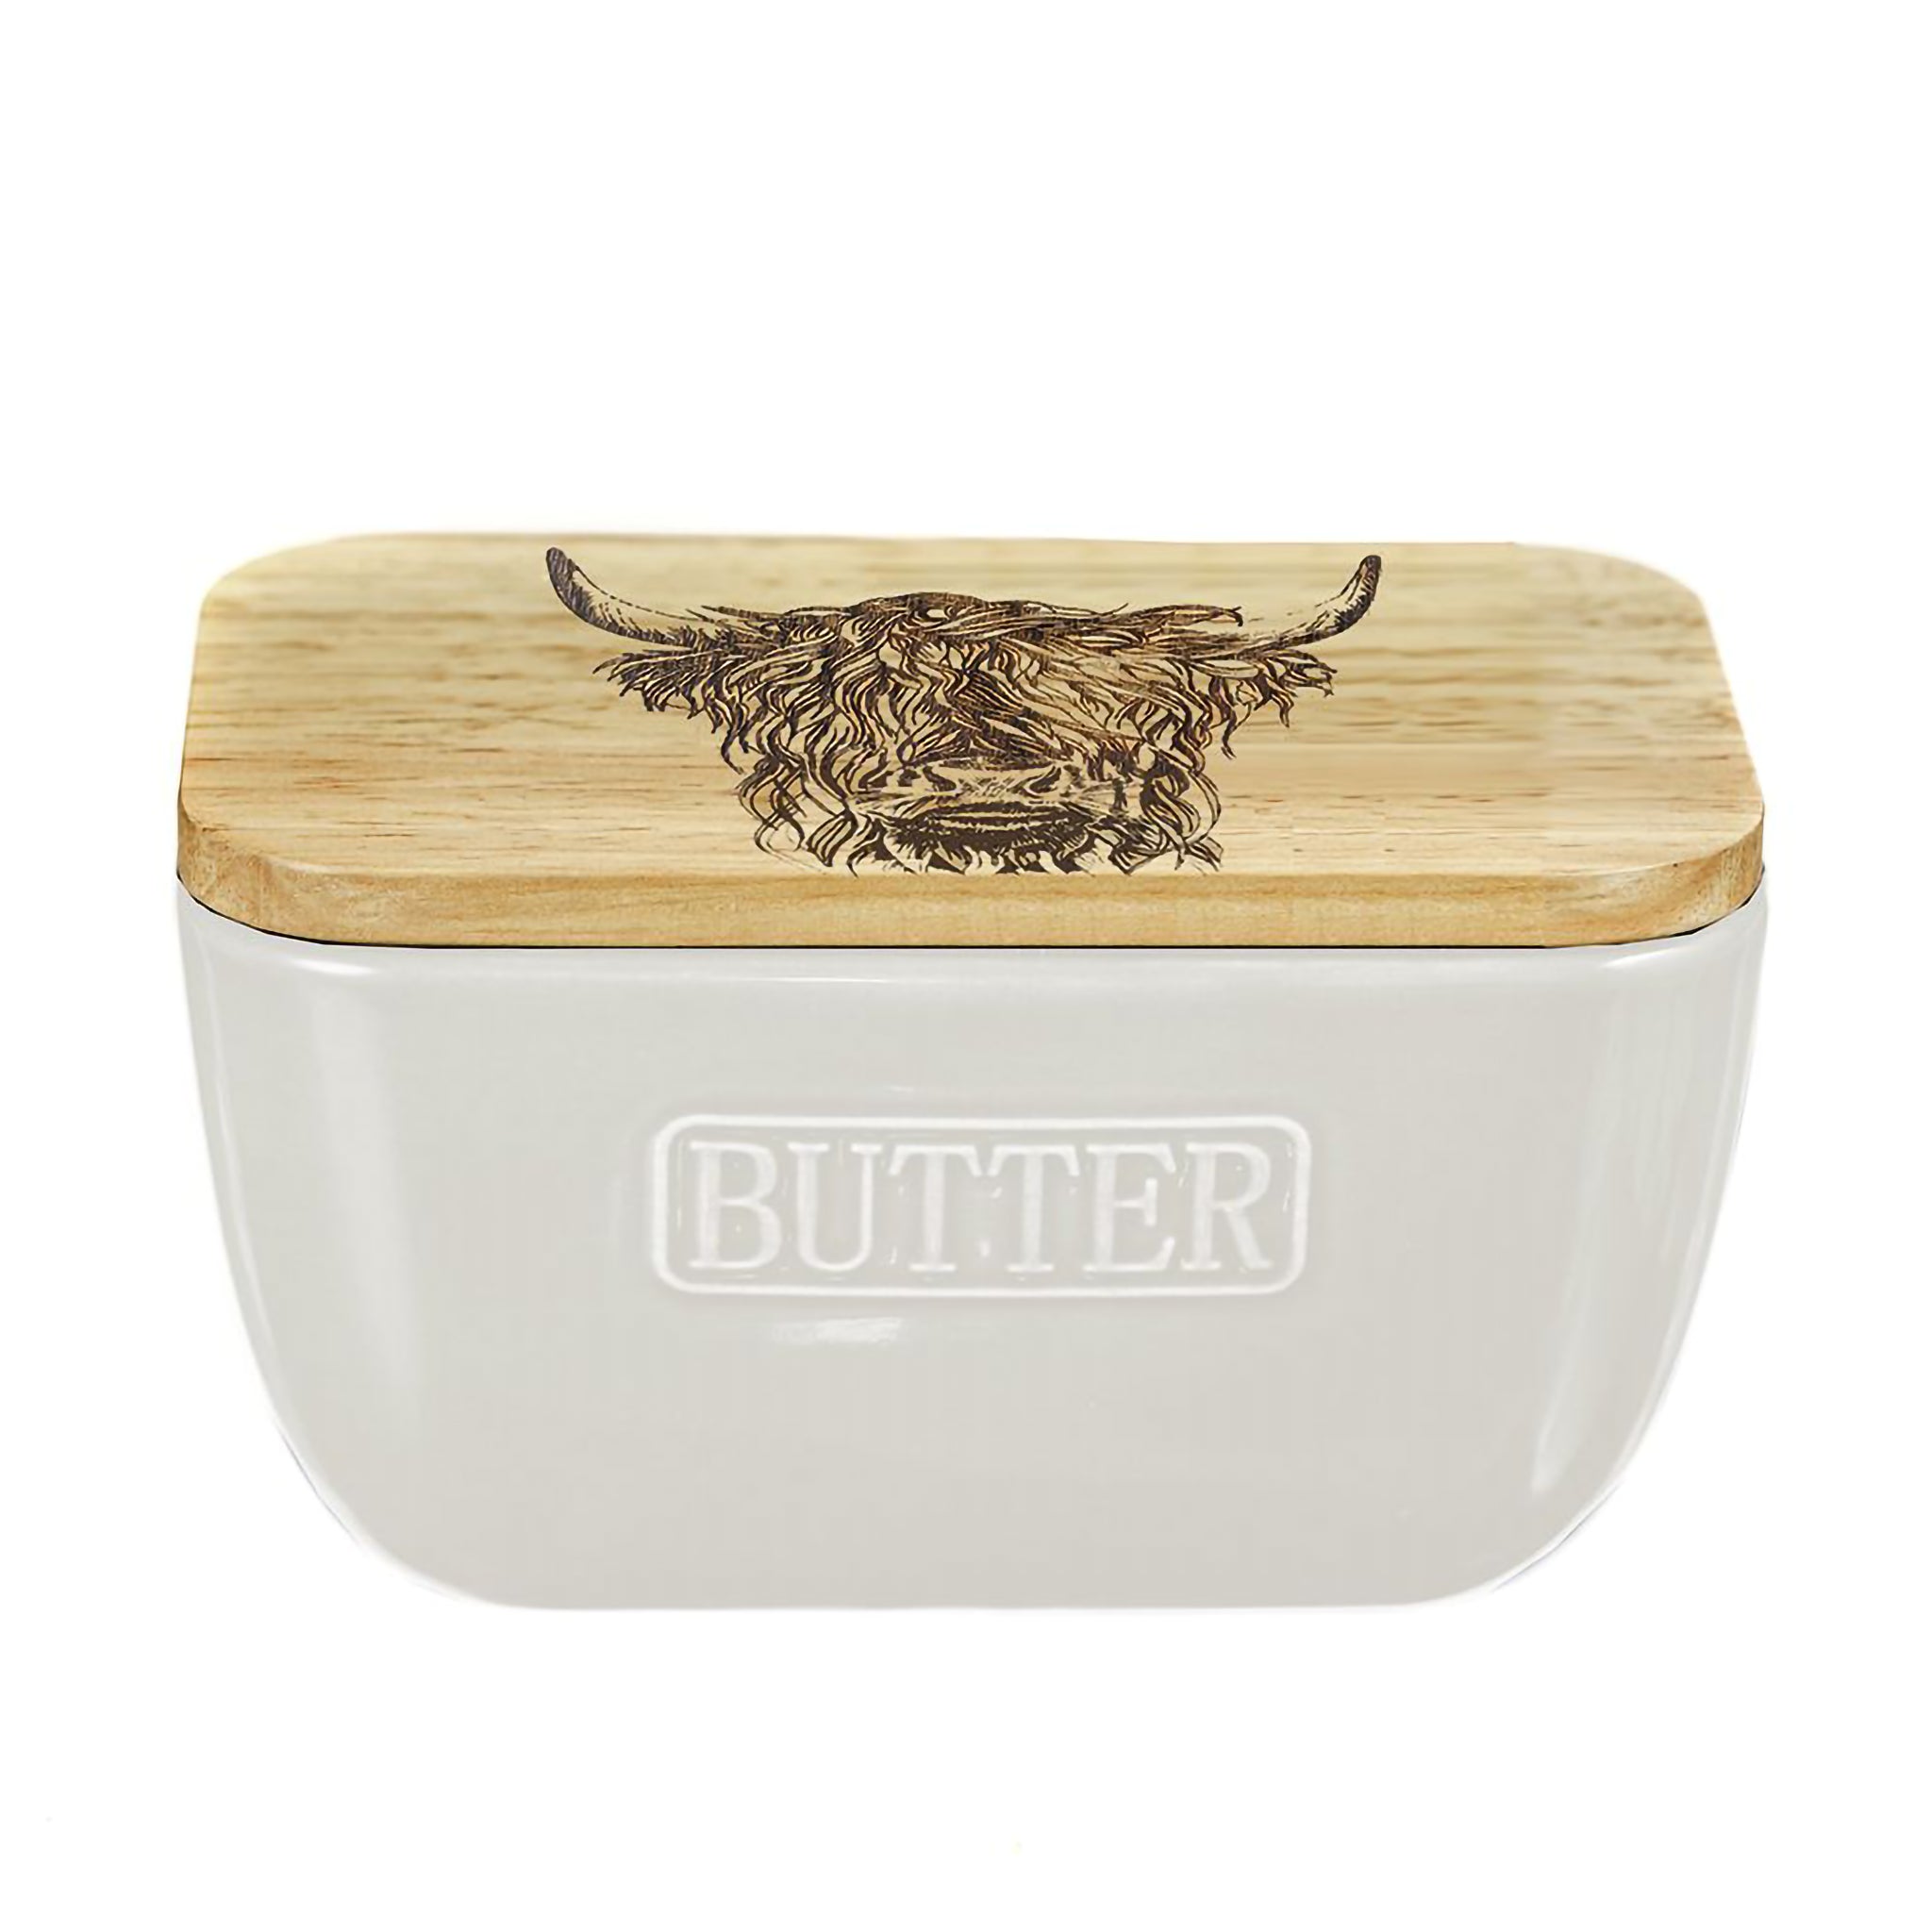 White ceramic butter dish with a wooden lid engraved with a Highland cow